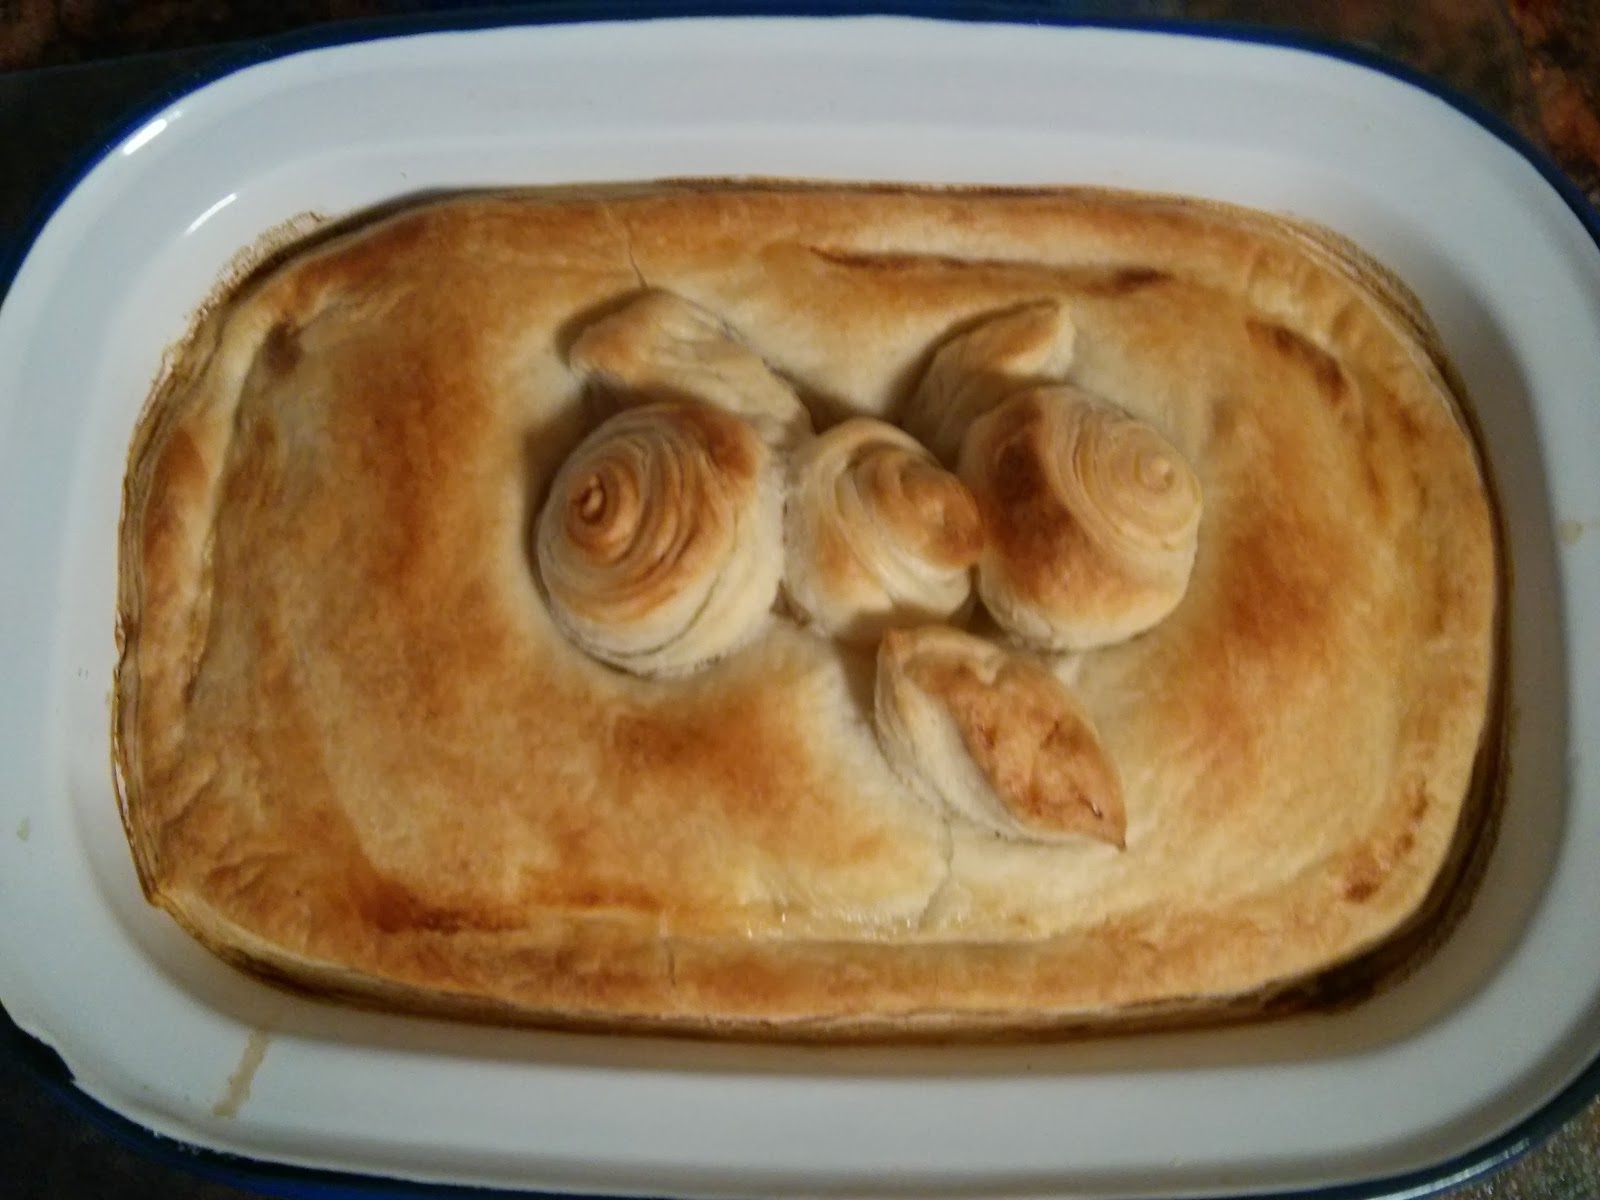 A Puff Pastry Pie - Crust is quite poisonous so don't let children eat it, just eat it yourself